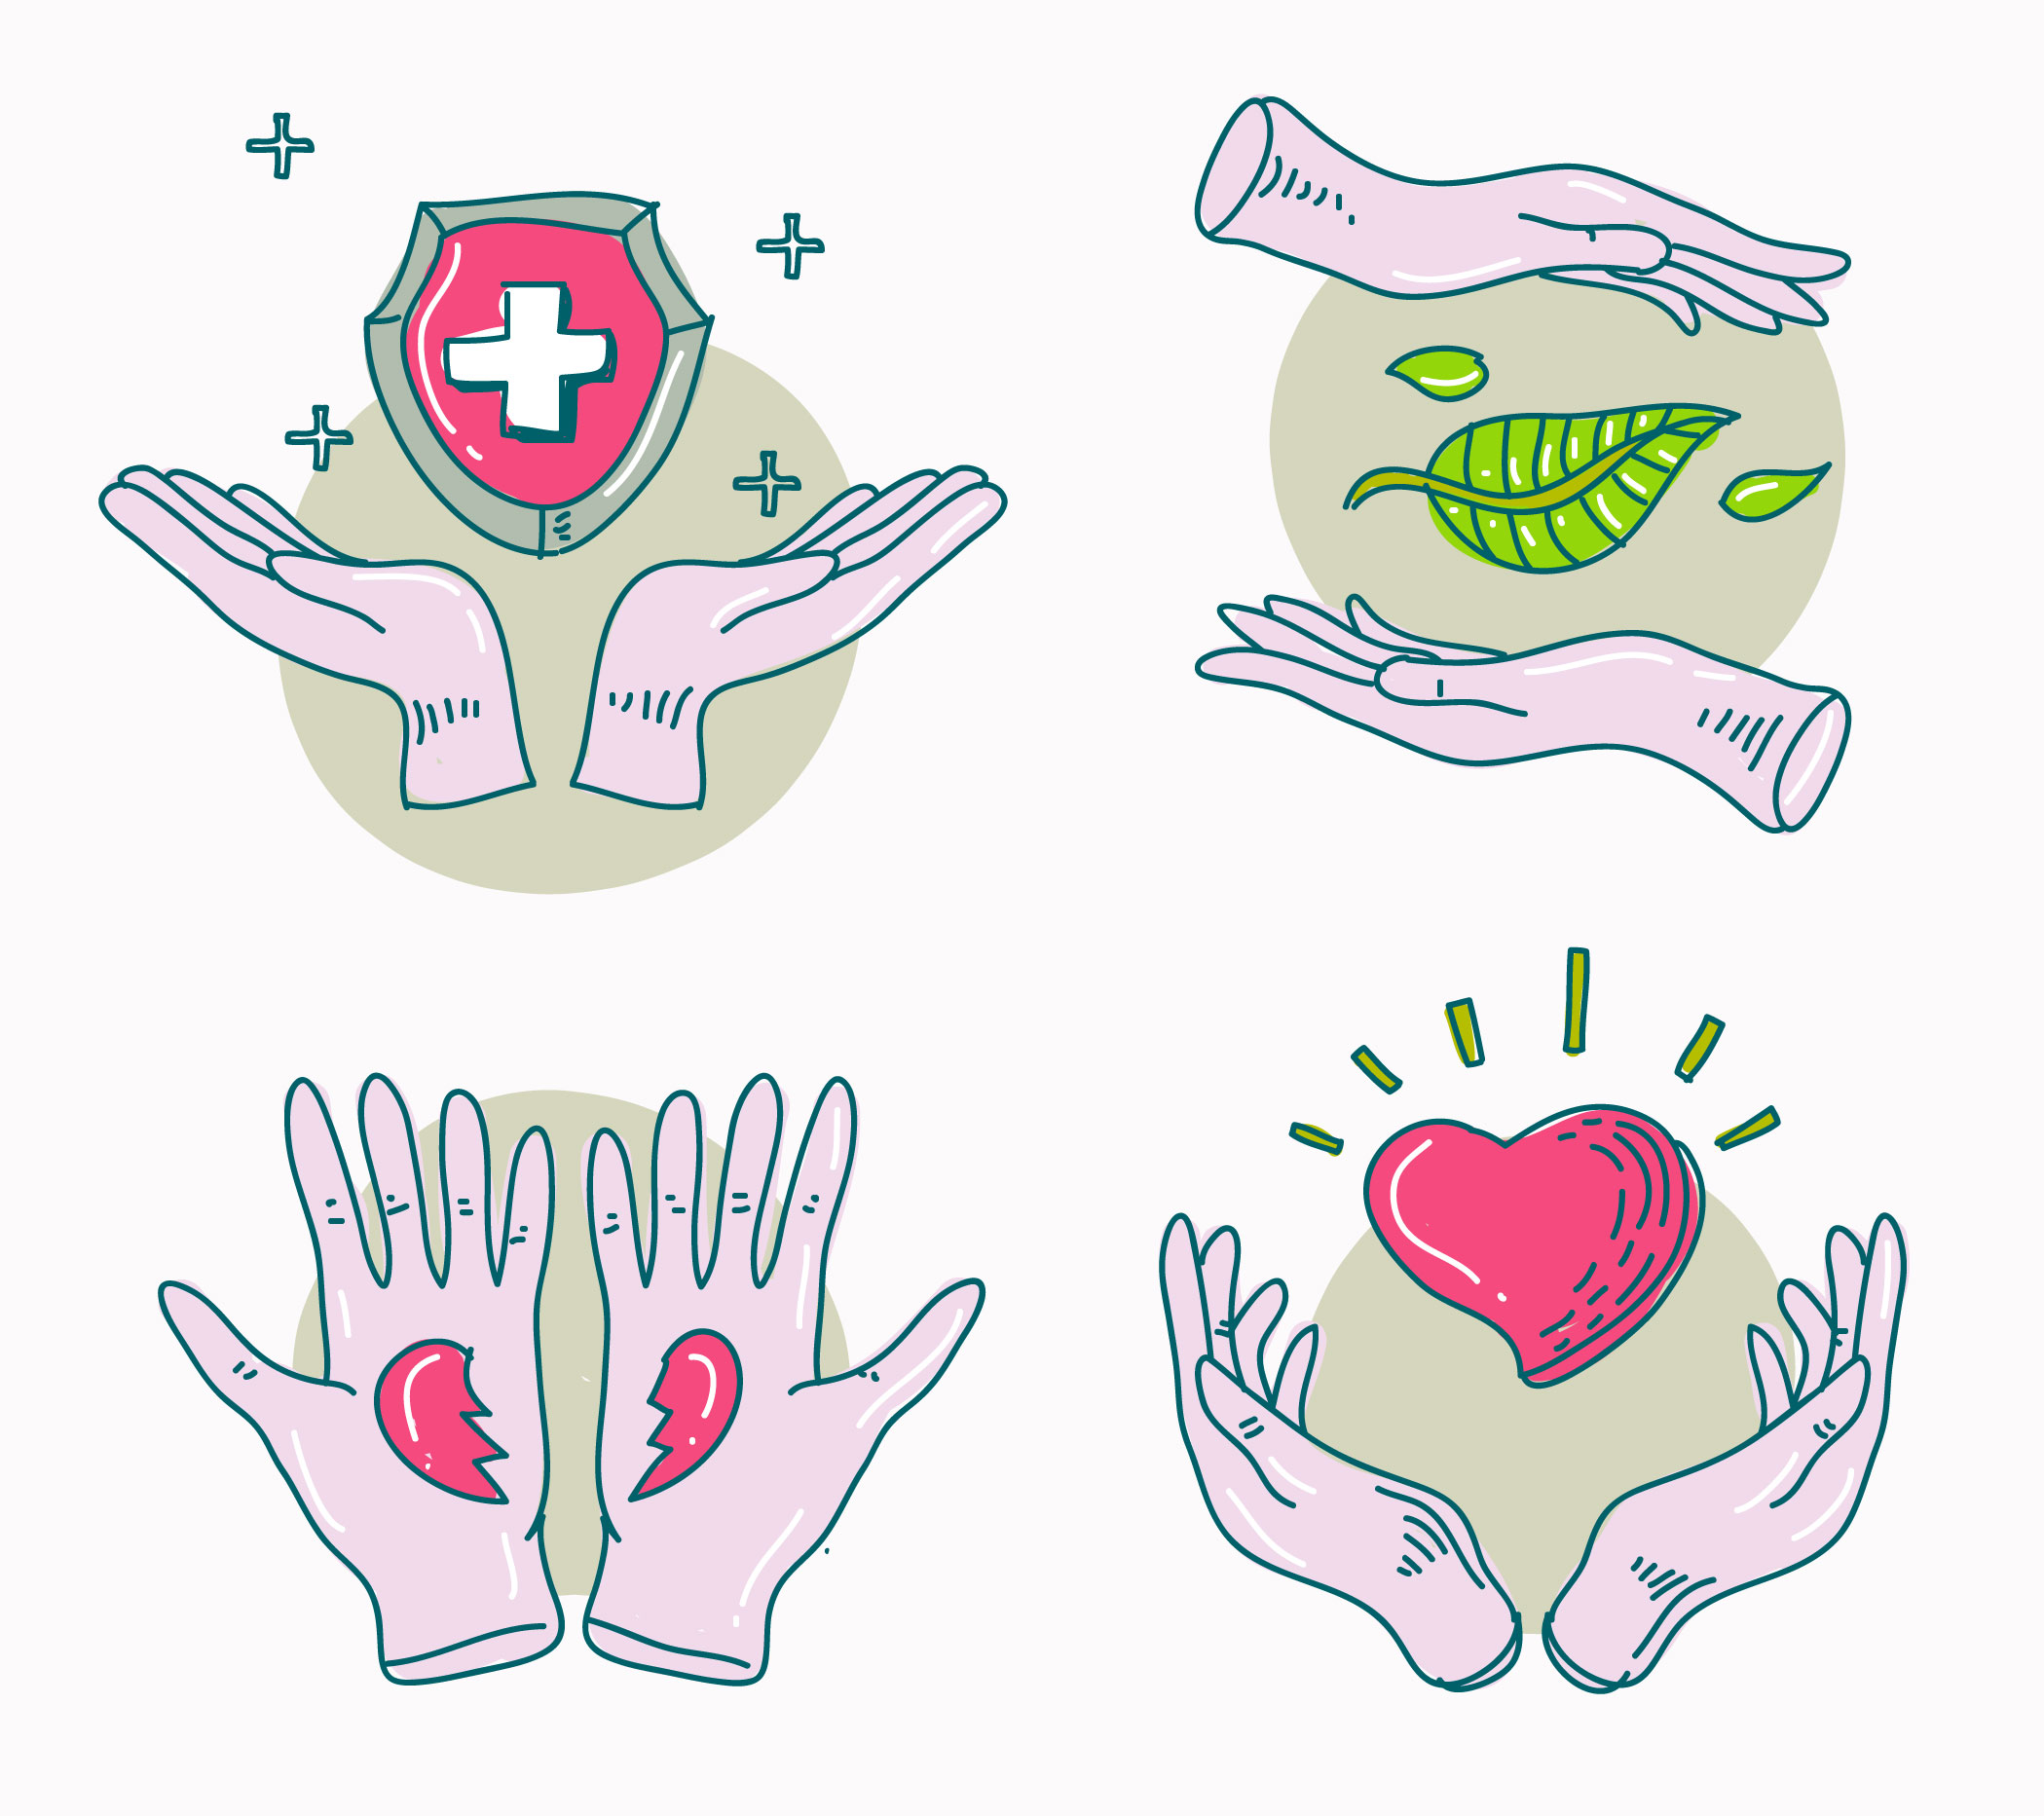 Download the Healing Hands Protection Hand Drawn Vector Illustration 171154